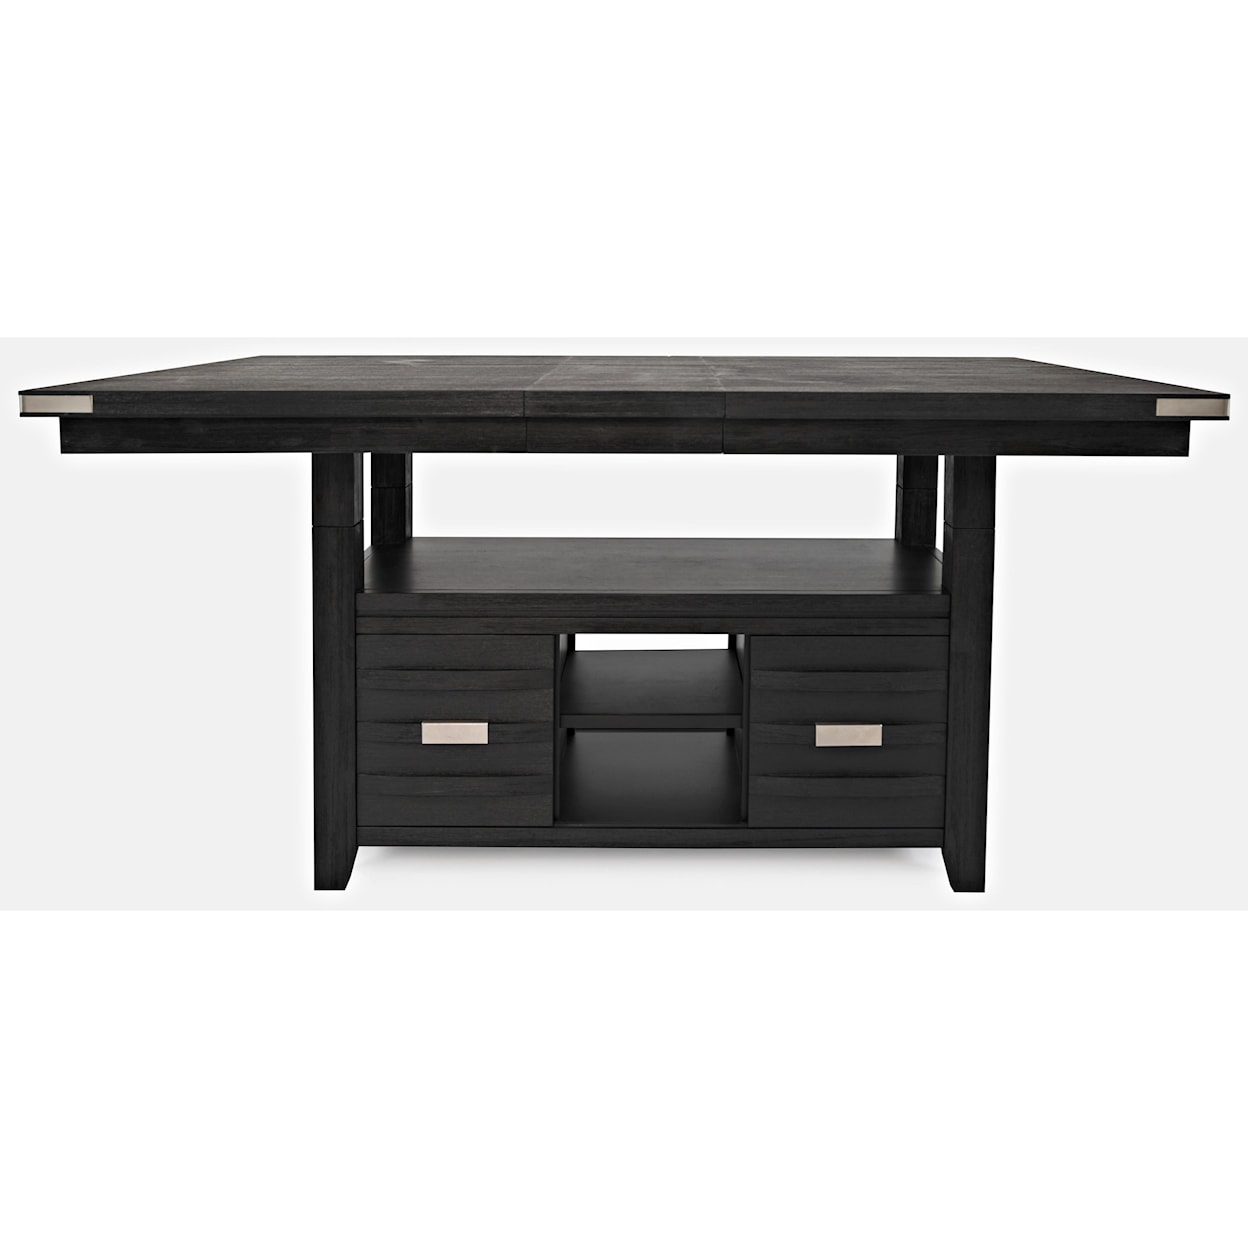 VFM Signature Altamonte - 1850 Counter Height Dining Table